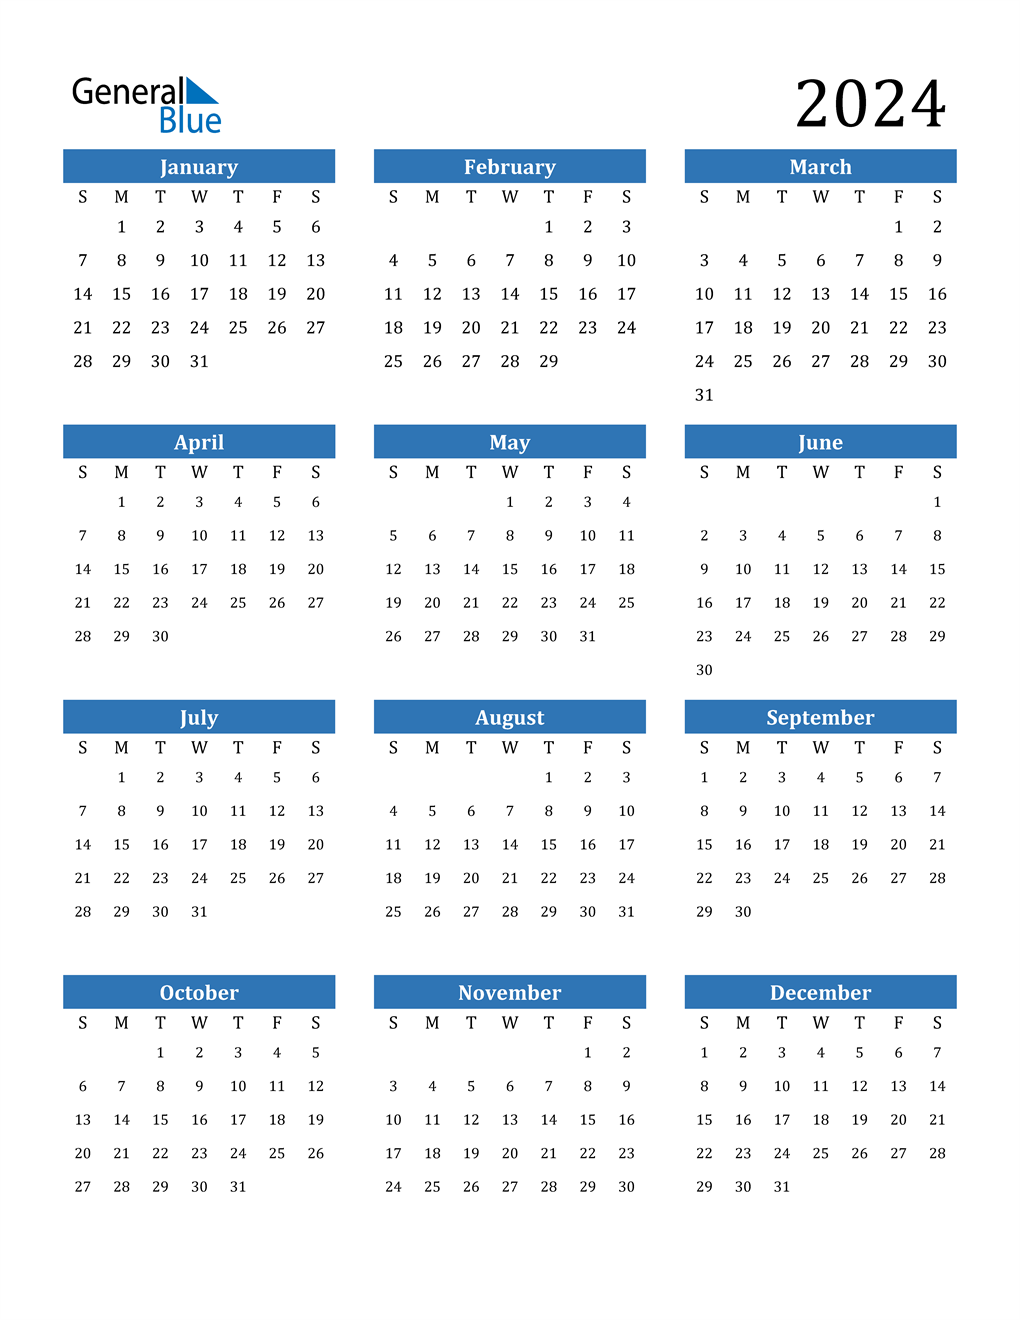 2024 Calendar Printable Free - Free Printable 2024 Calendar With Previous And Next Month Shown